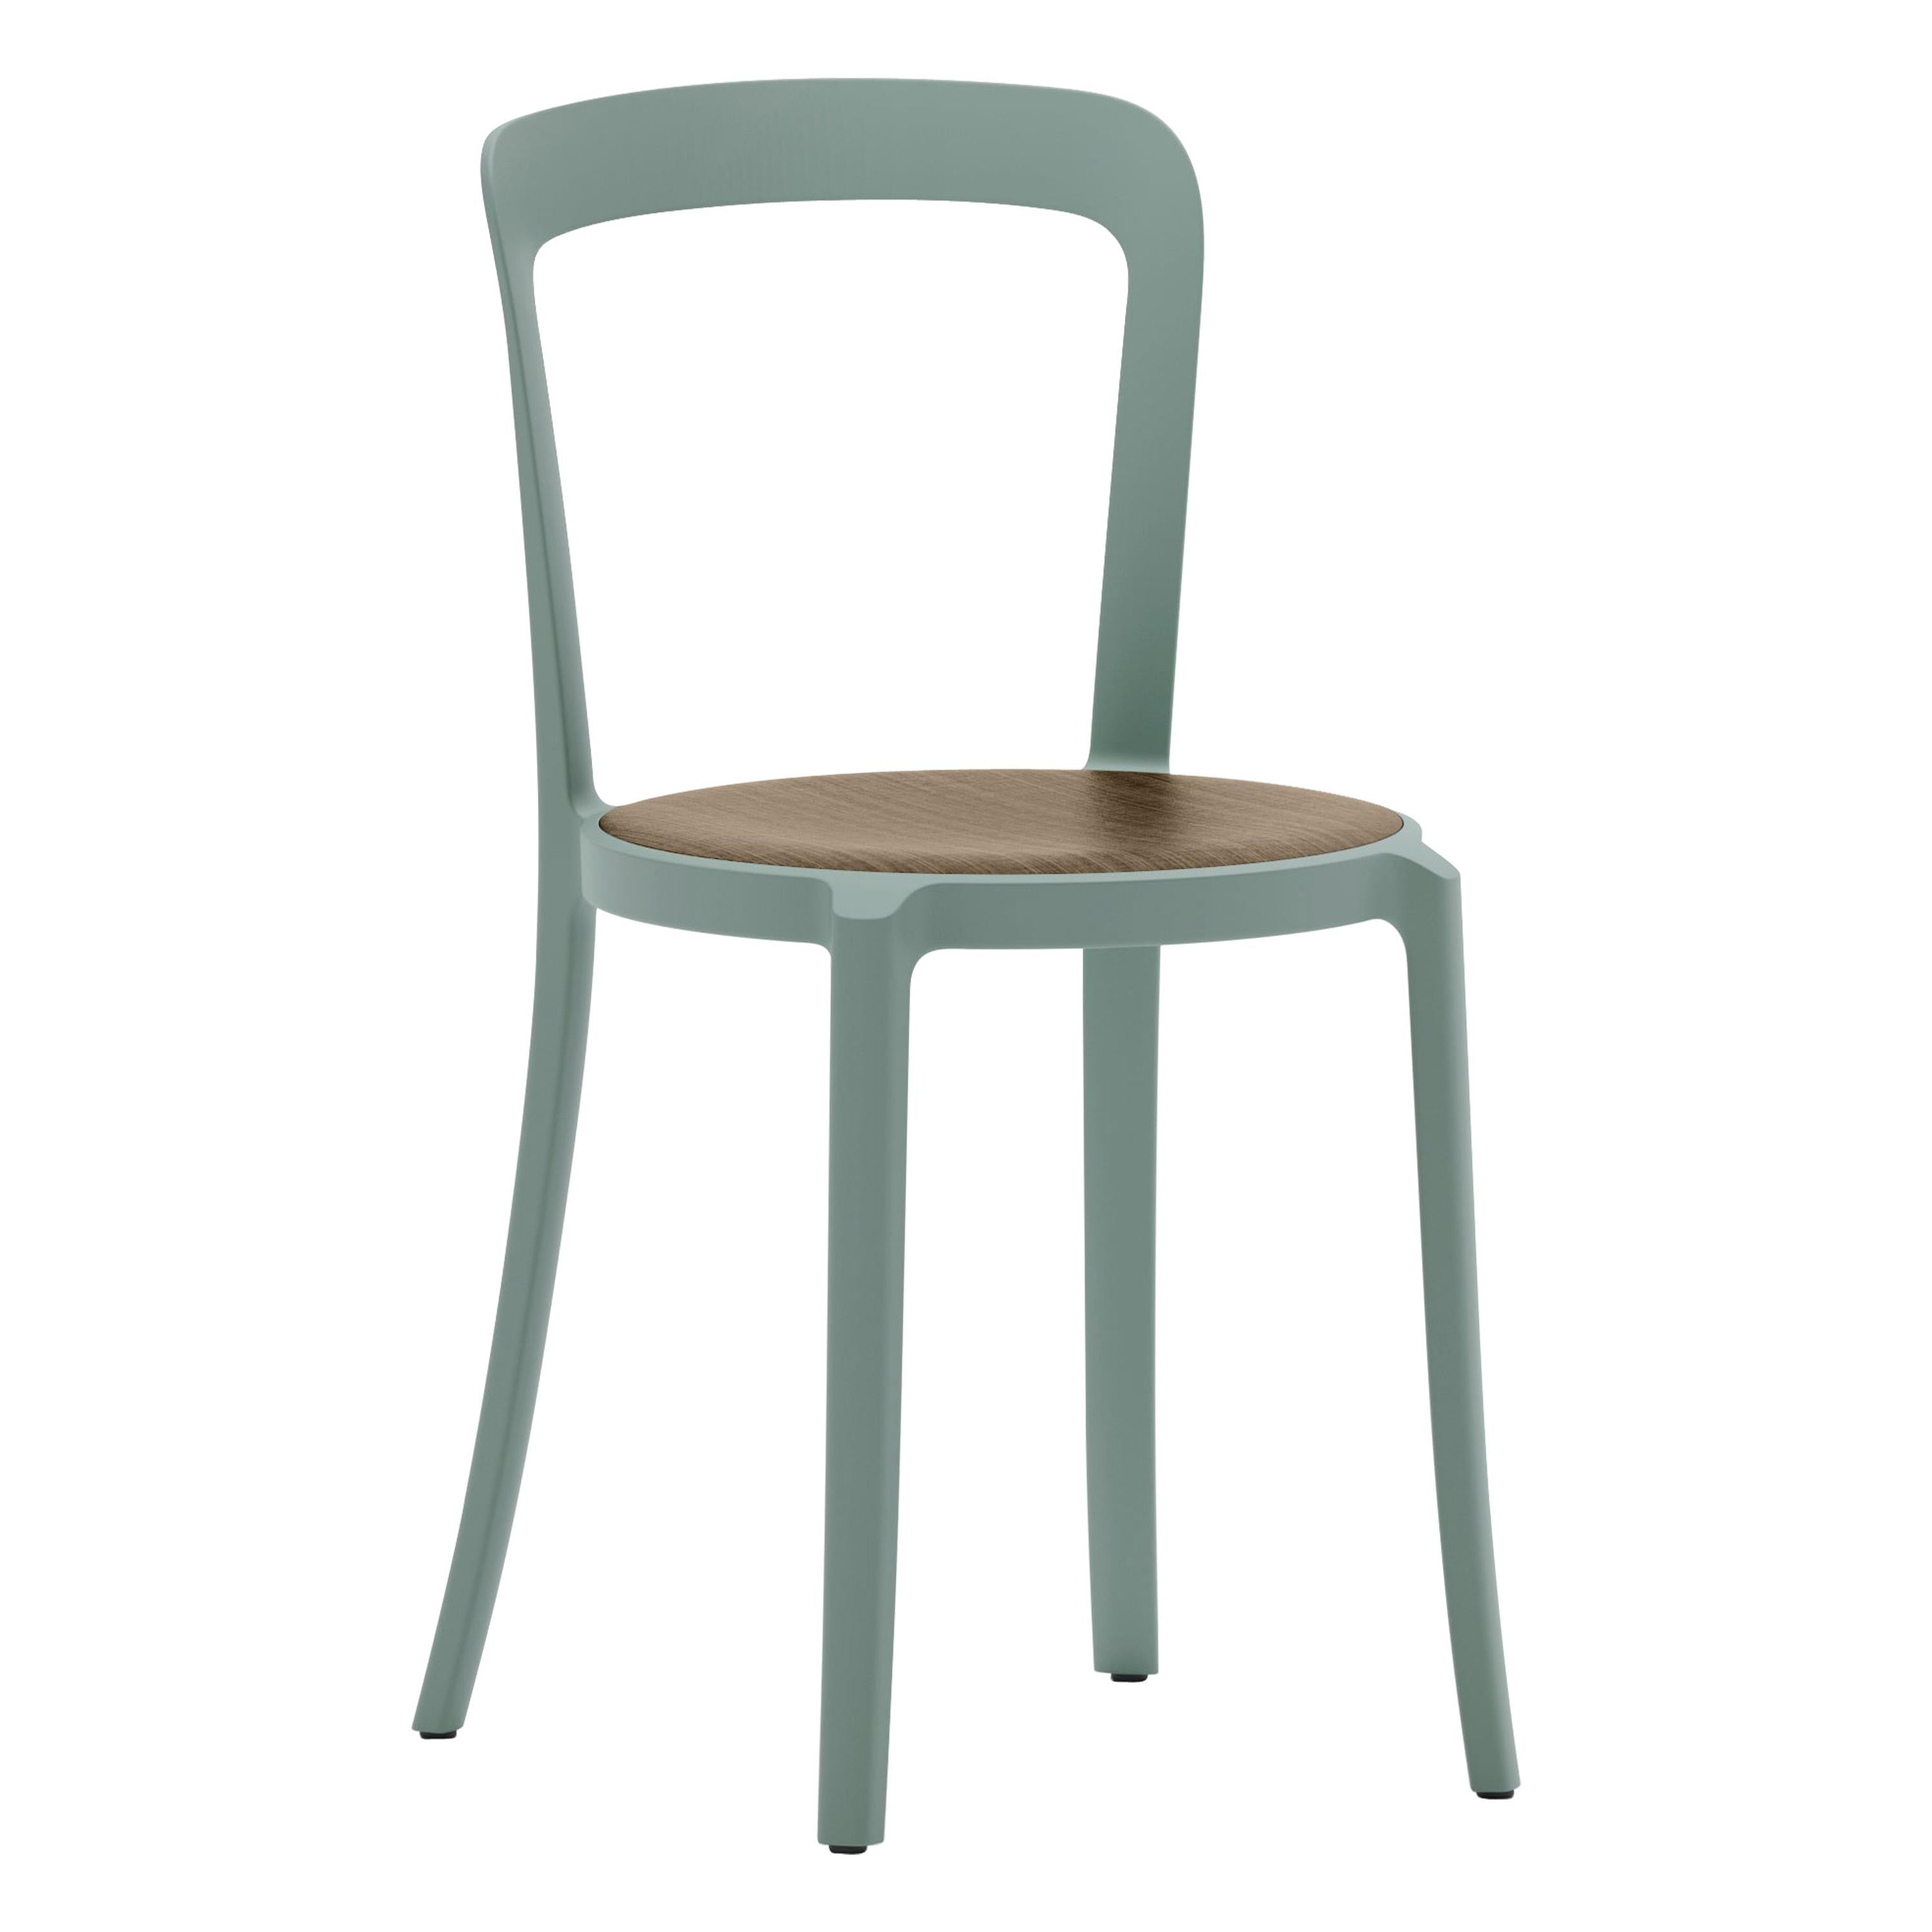 Emeco On & On Stacking Chair in Light Blue with Walnut seat by Barber & Osgerby